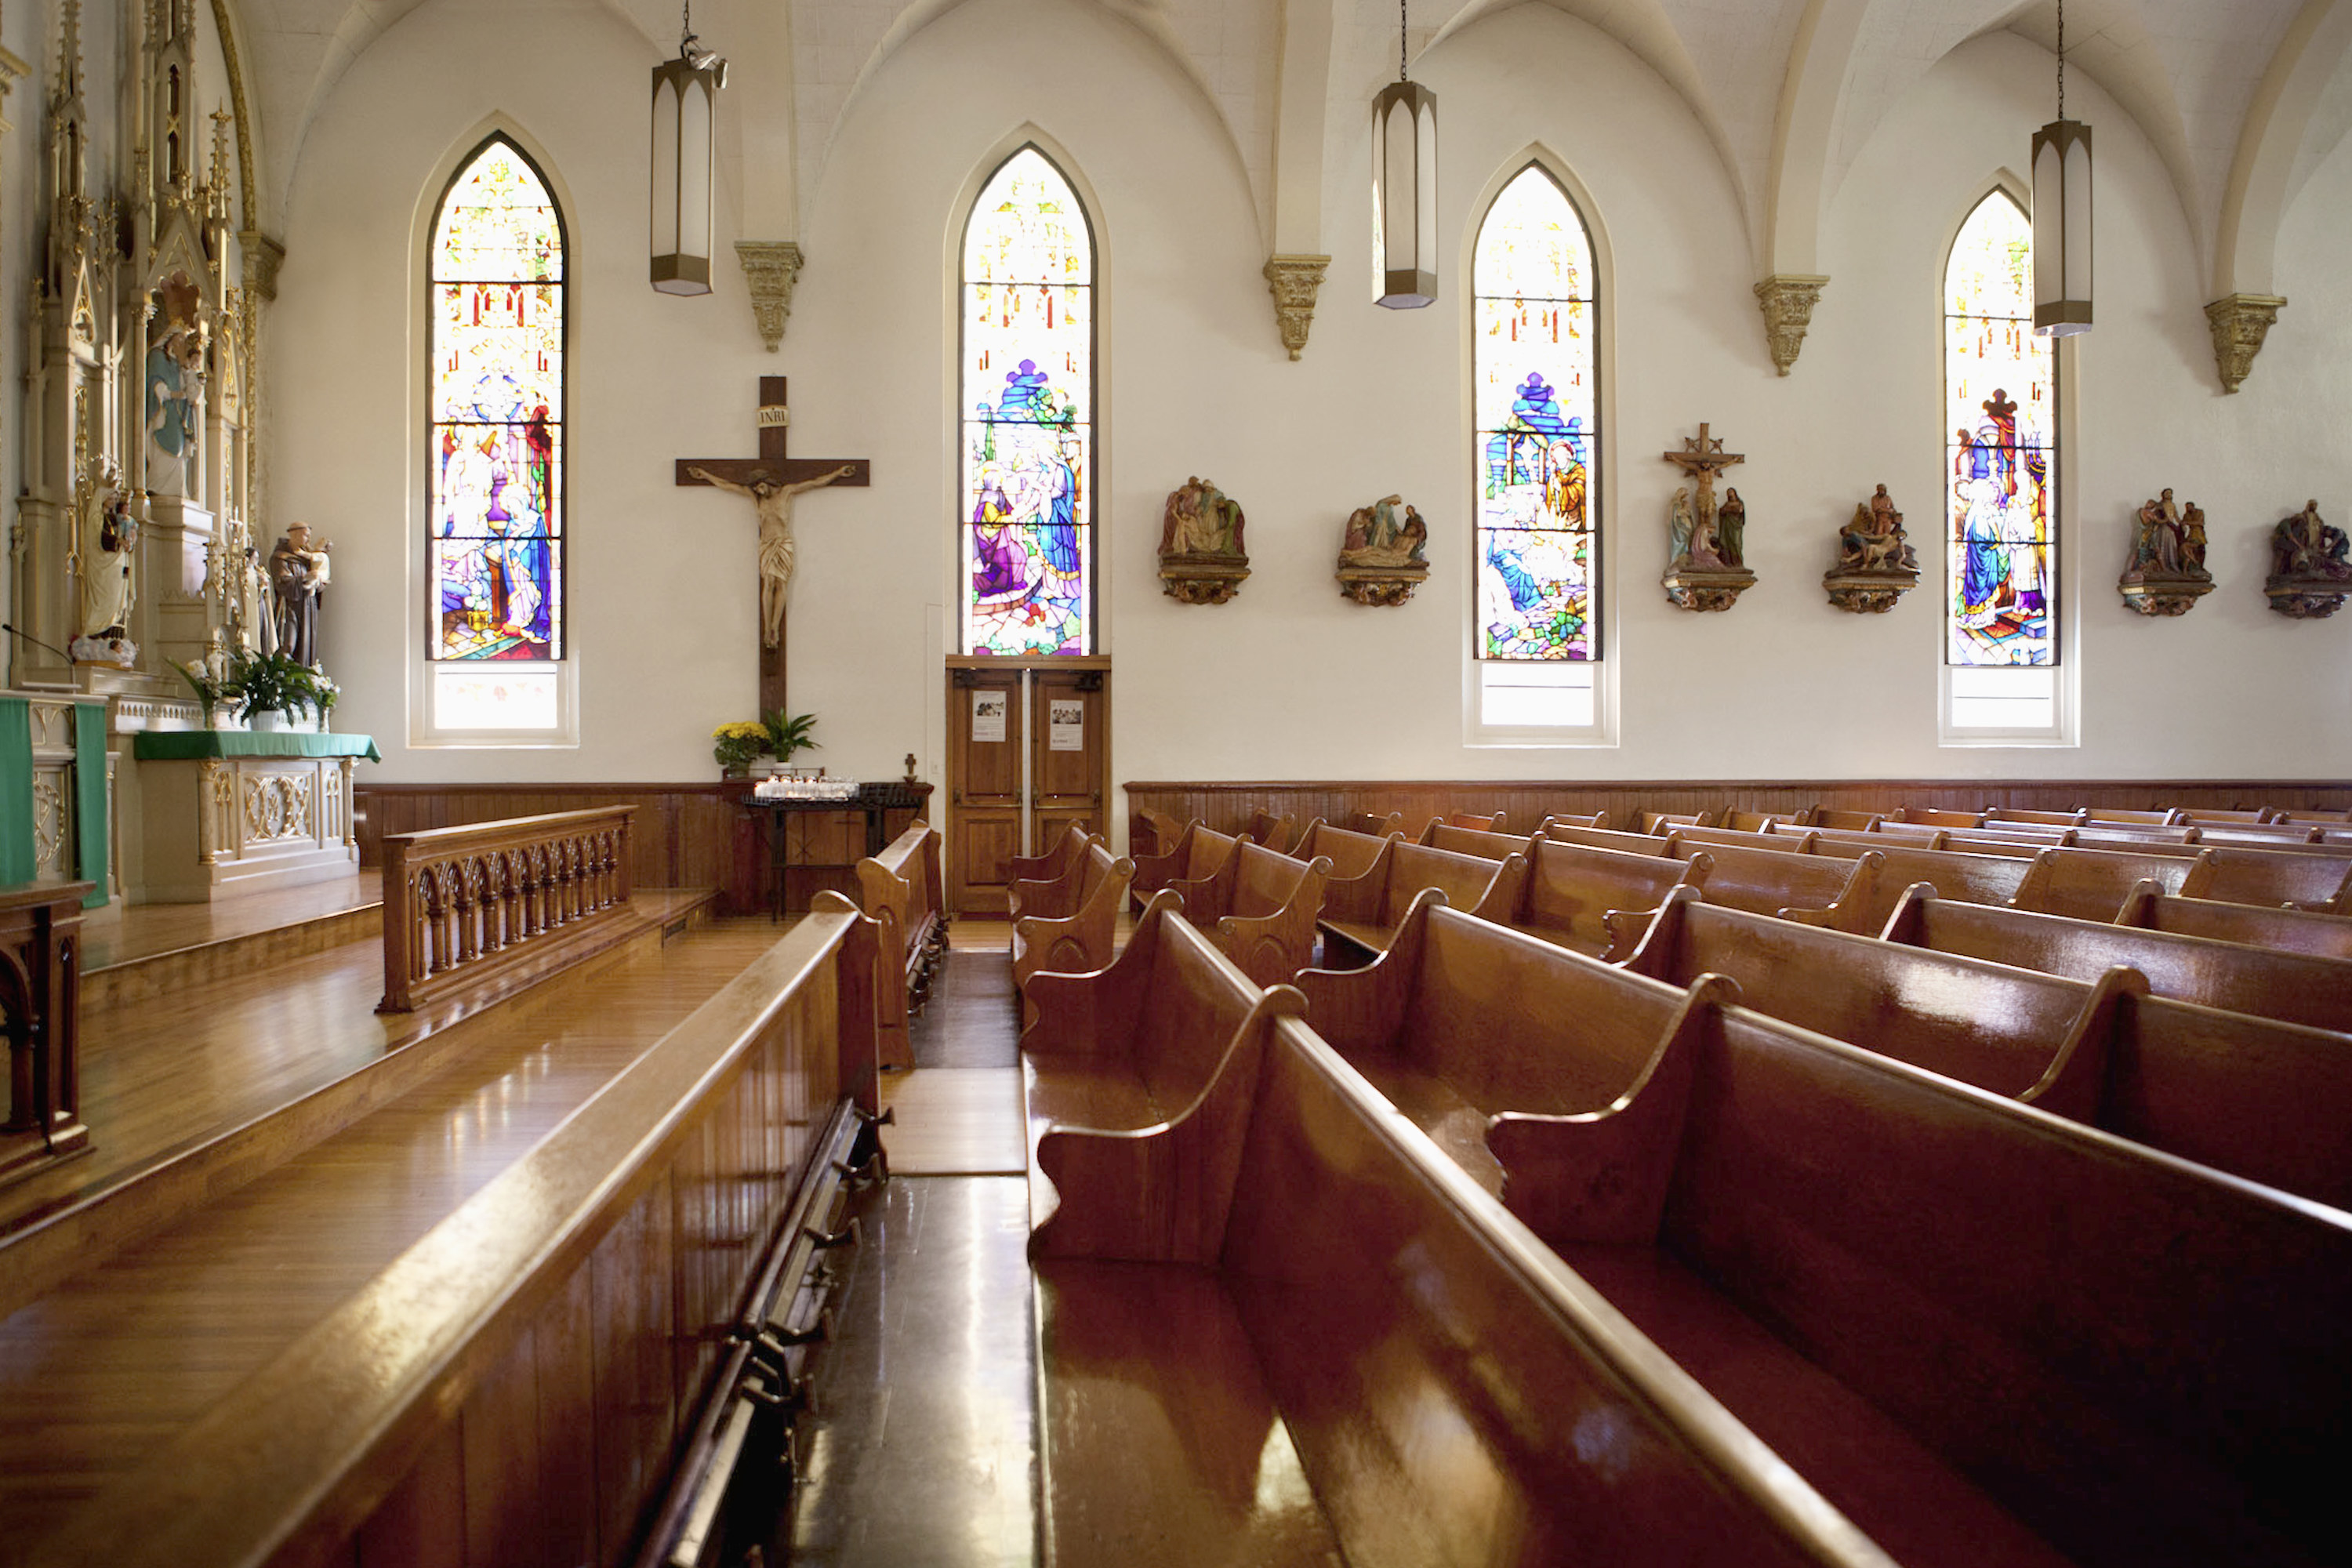 A view down the pews of a church